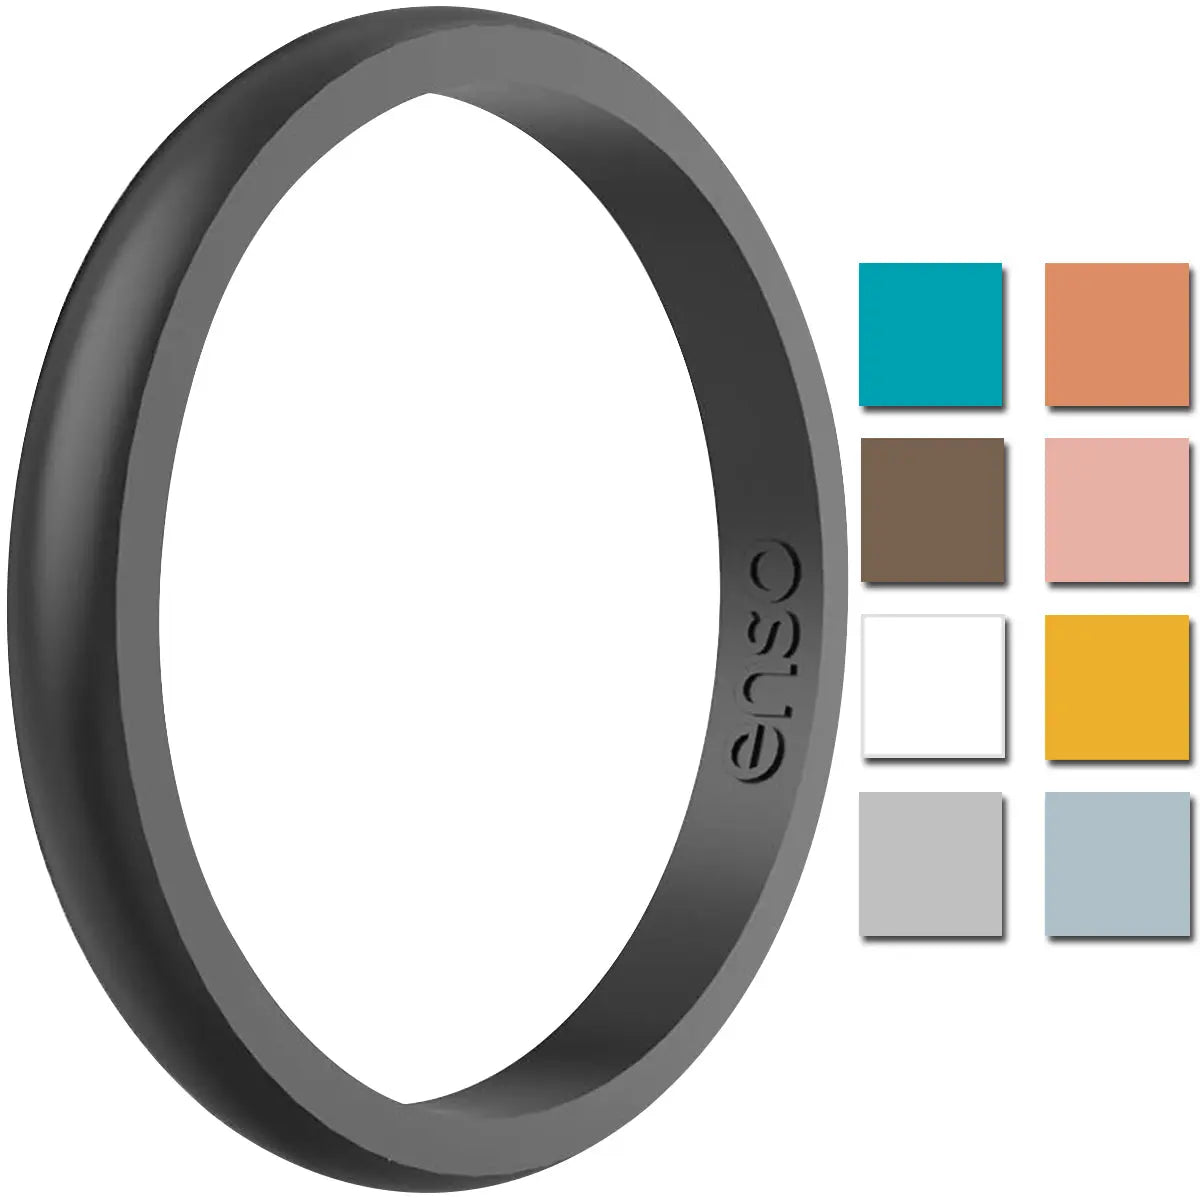 Enso Rings Halo Elements Series Silicone Ring